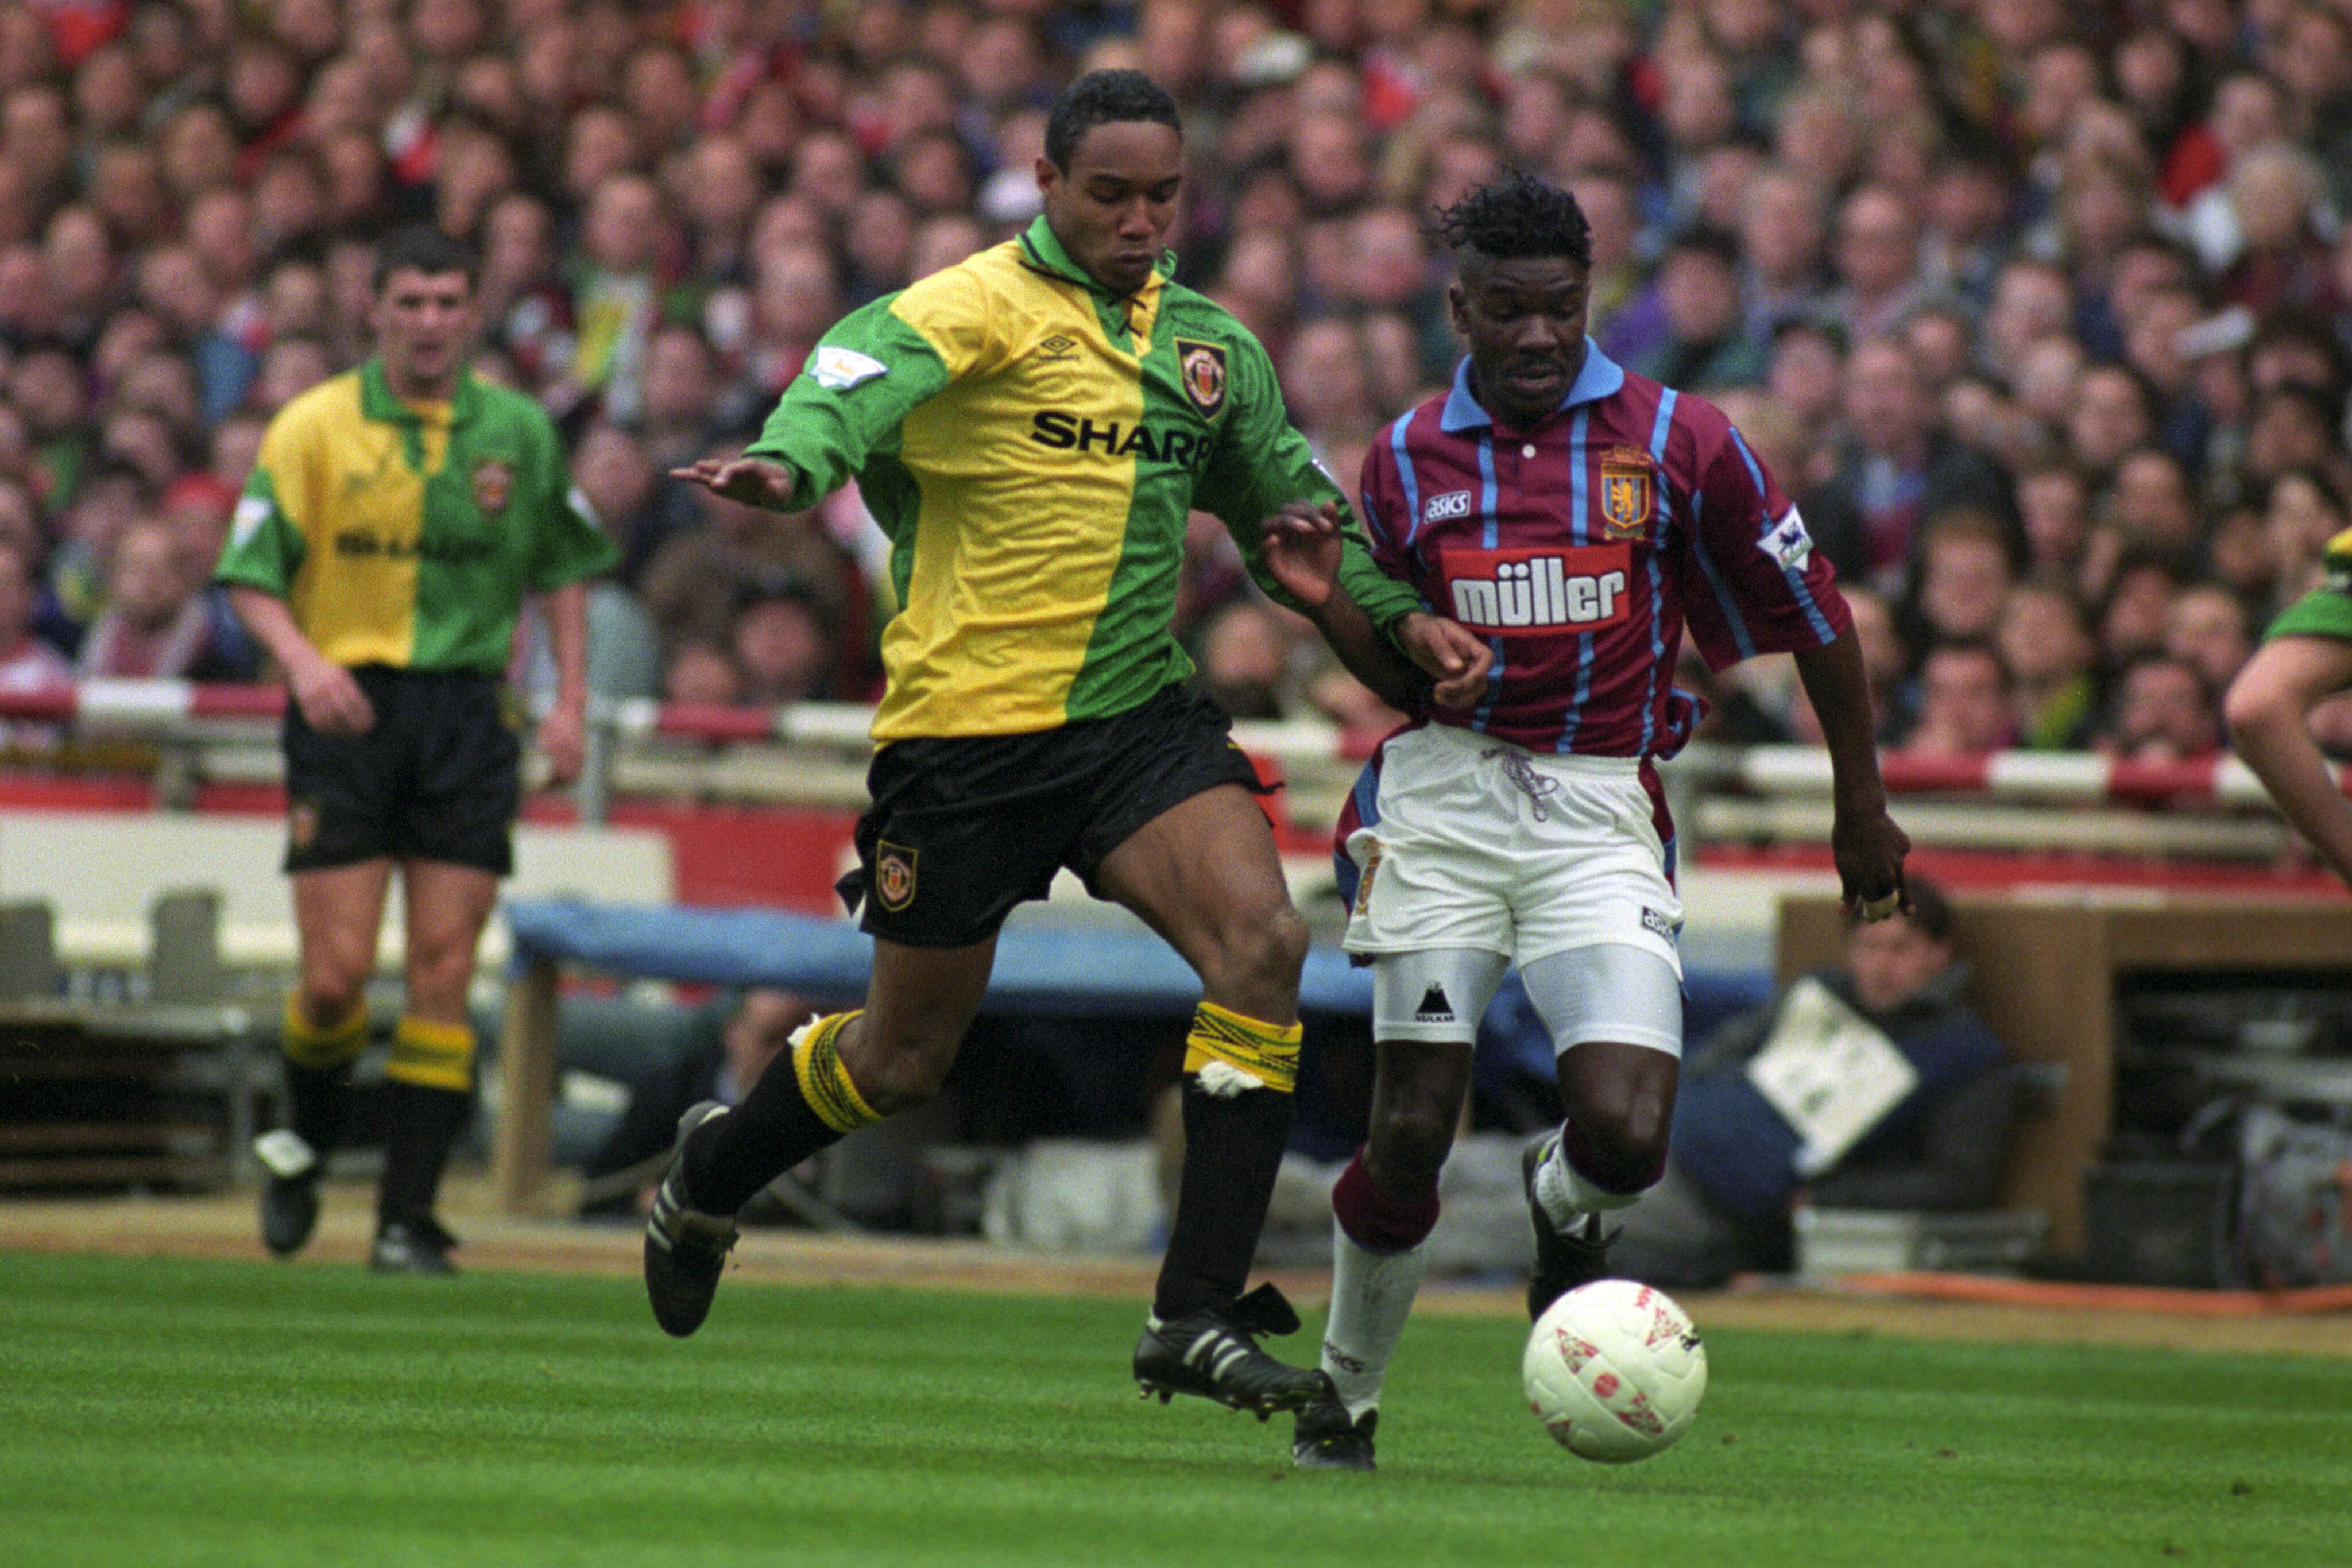 Paul Ince tries to outrun his strip